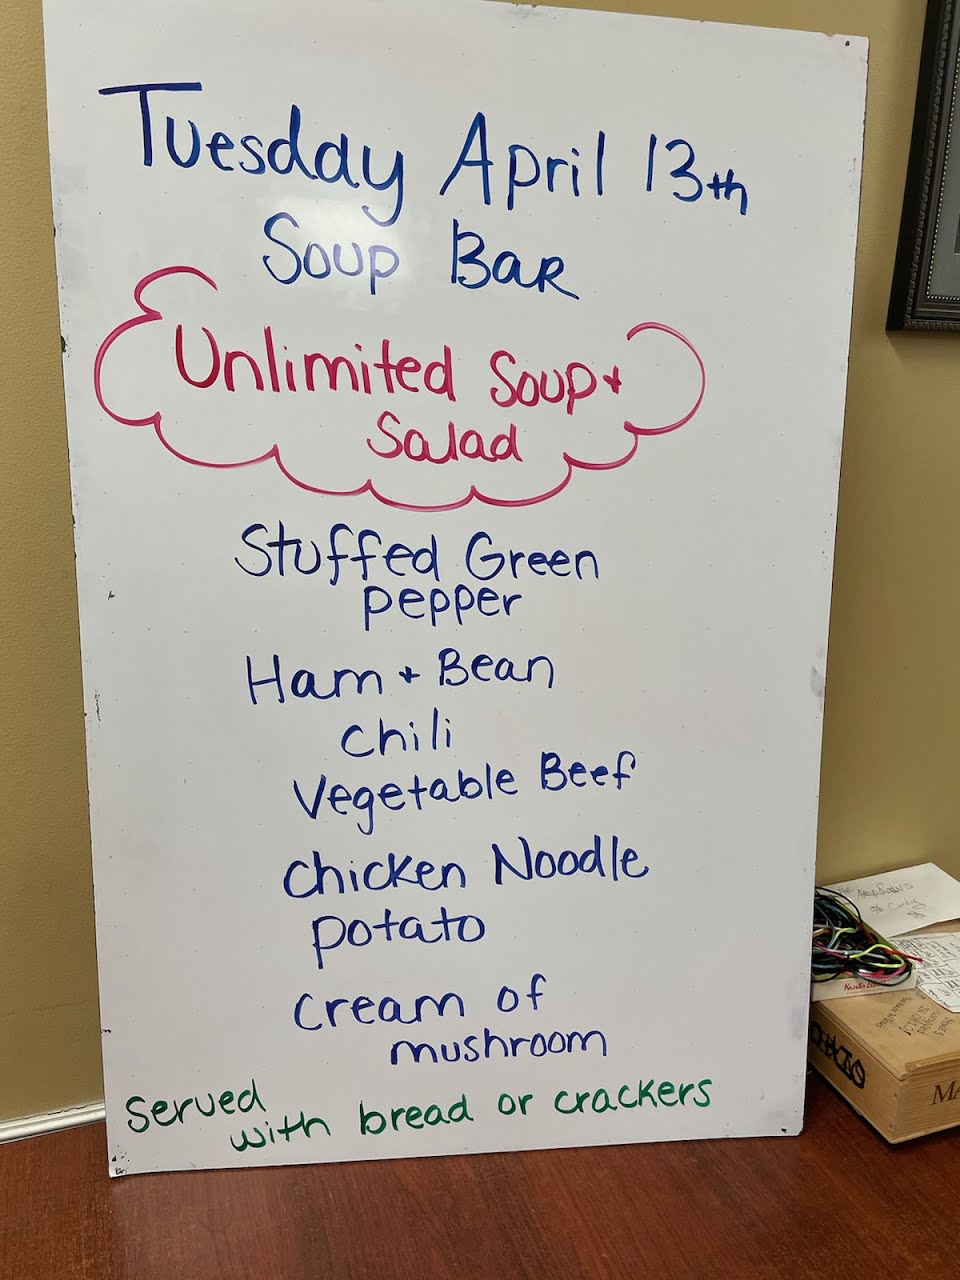 Unlimited Soup Bar for Tuesday, April 13th